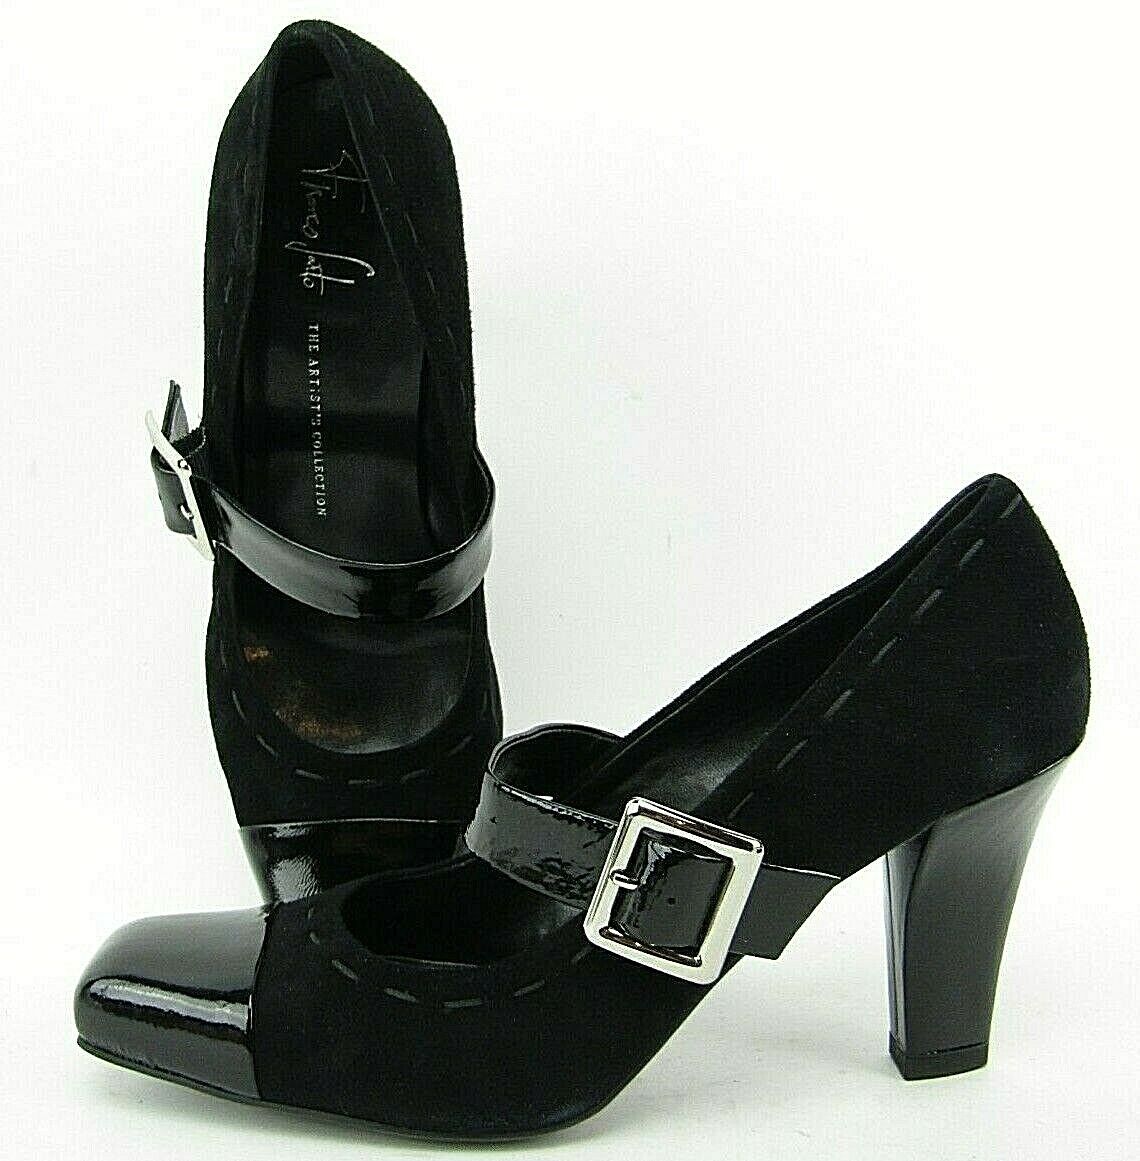 Franco Austin Mall Sarto 10M Yves Black Patent Our shop OFFers the best service Leather Janes Mary Womens Hee